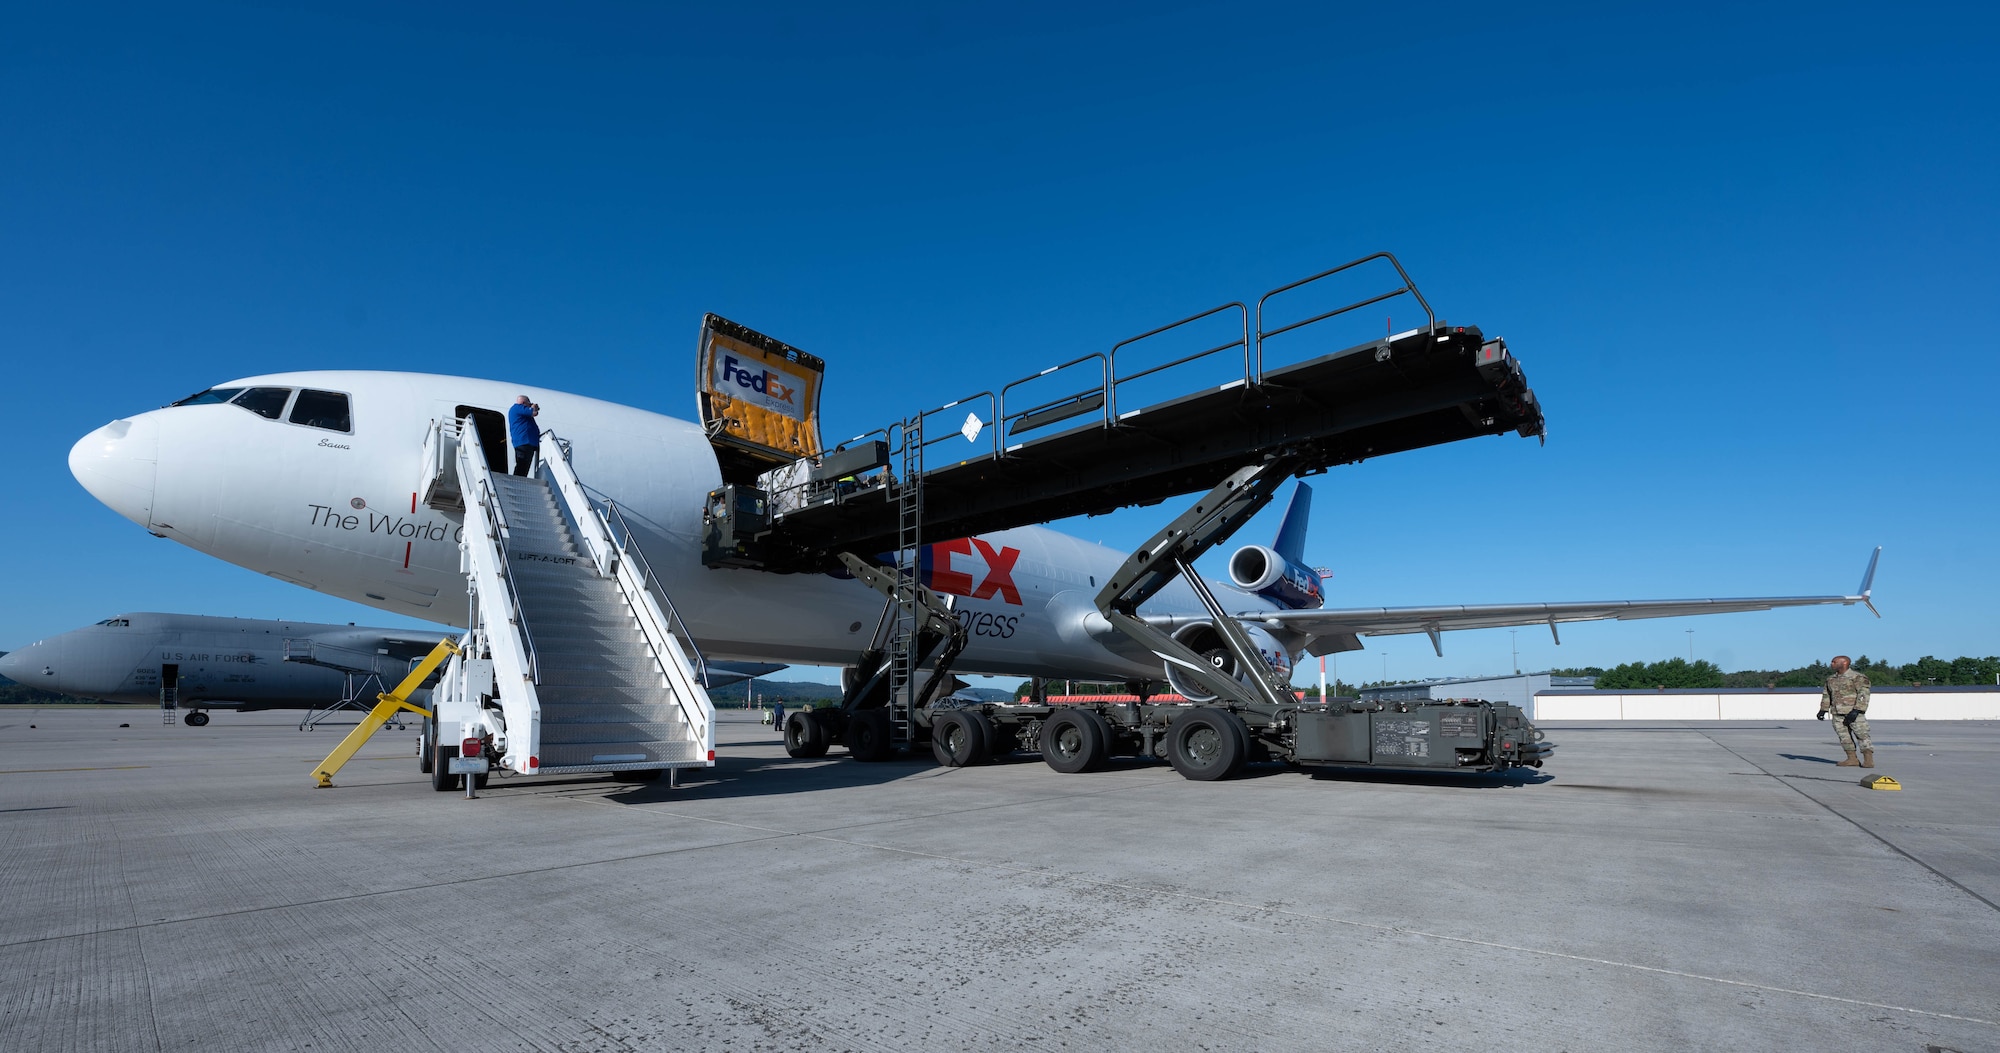 Pallets of infant formula are loaded onto a commercial aircraft.